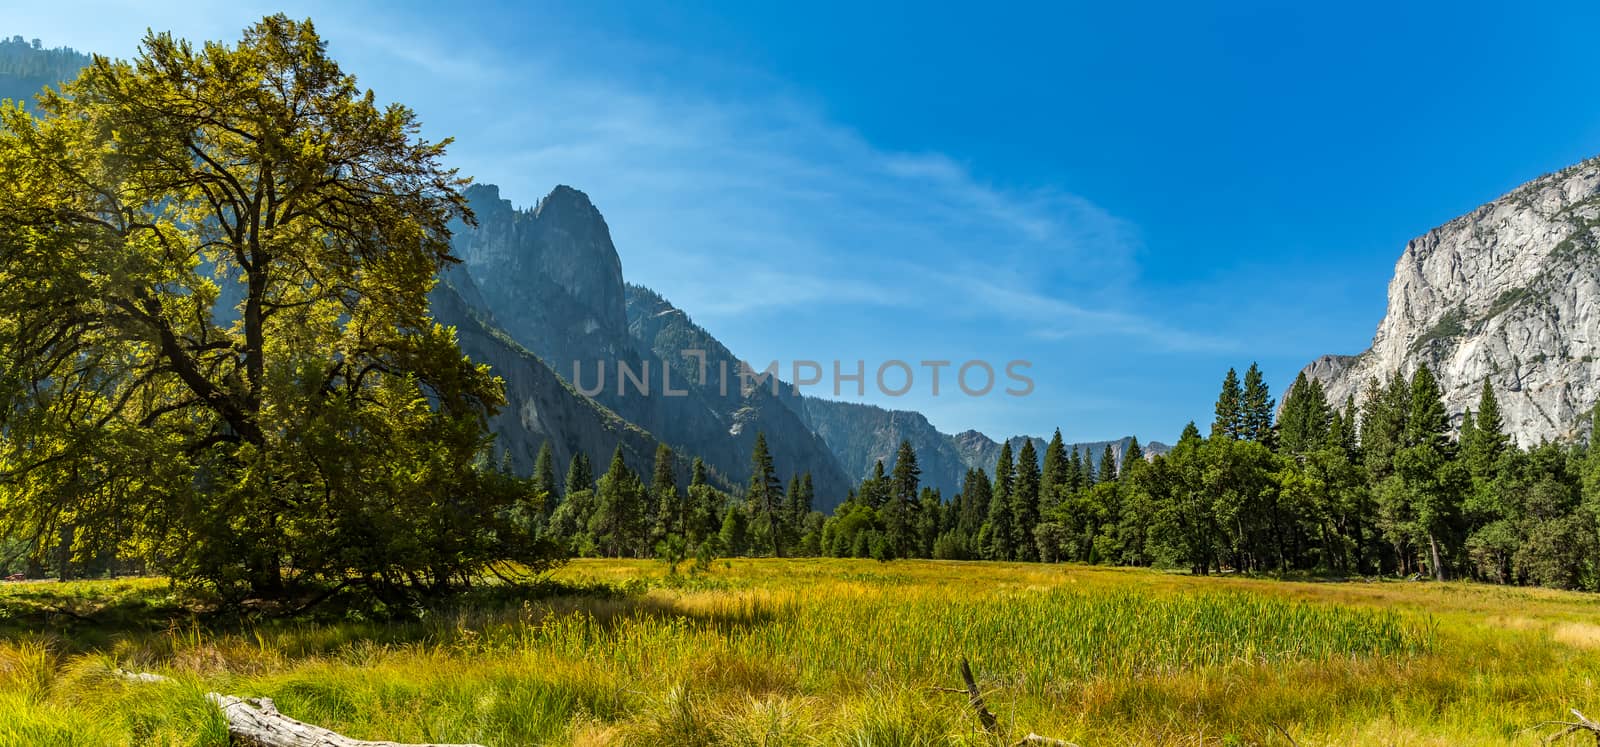 Sentinel Dome from Cooks Meadow by adifferentbrian